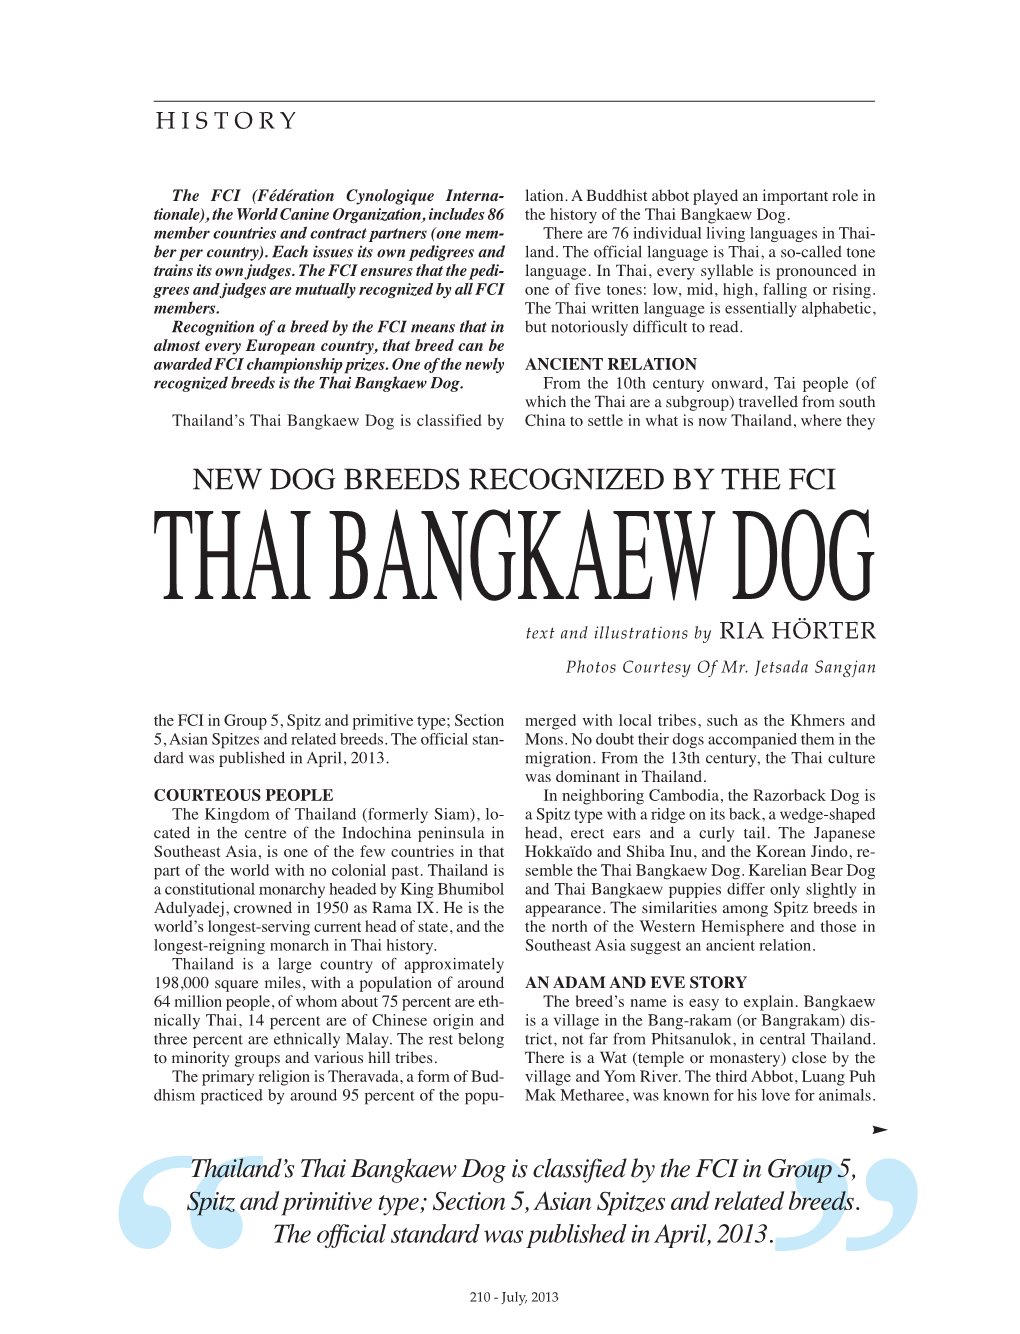 NEW DOG BREEDS RECOGNIZED by the FCI THAI BANGKAEW DOG Text and Illustrations by RIA HÖRTER Photos Courtesy of Mr